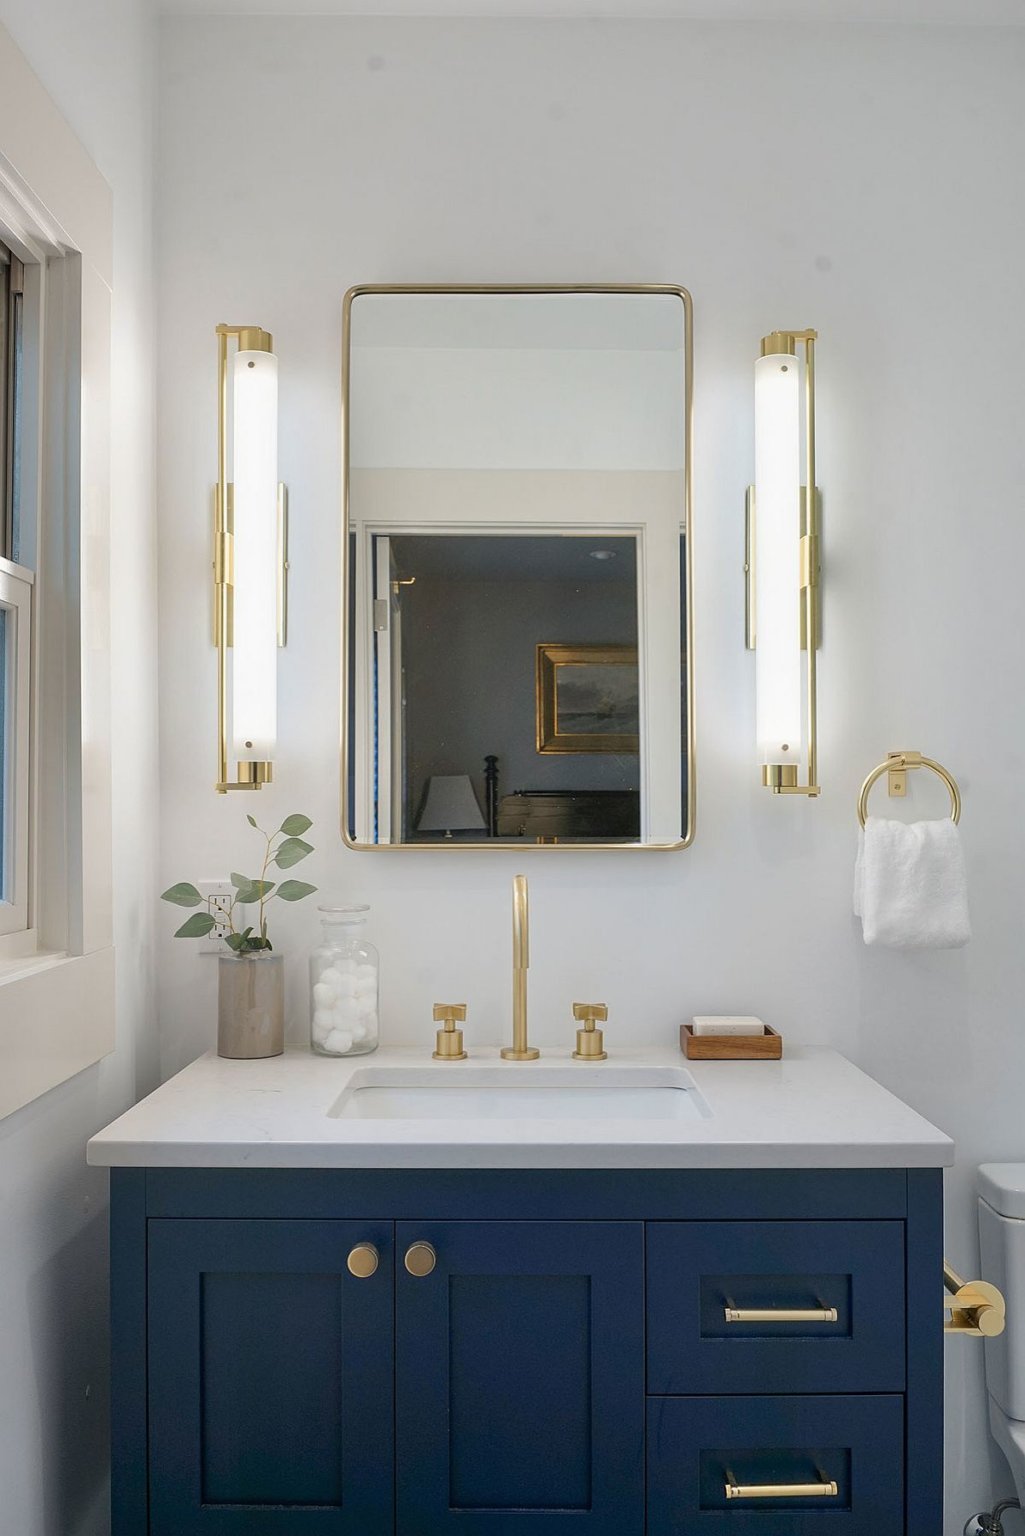 Combining Gold Accents With The Dashing Blue Vanity In The Modern Bathroom 16433 1025x1536 